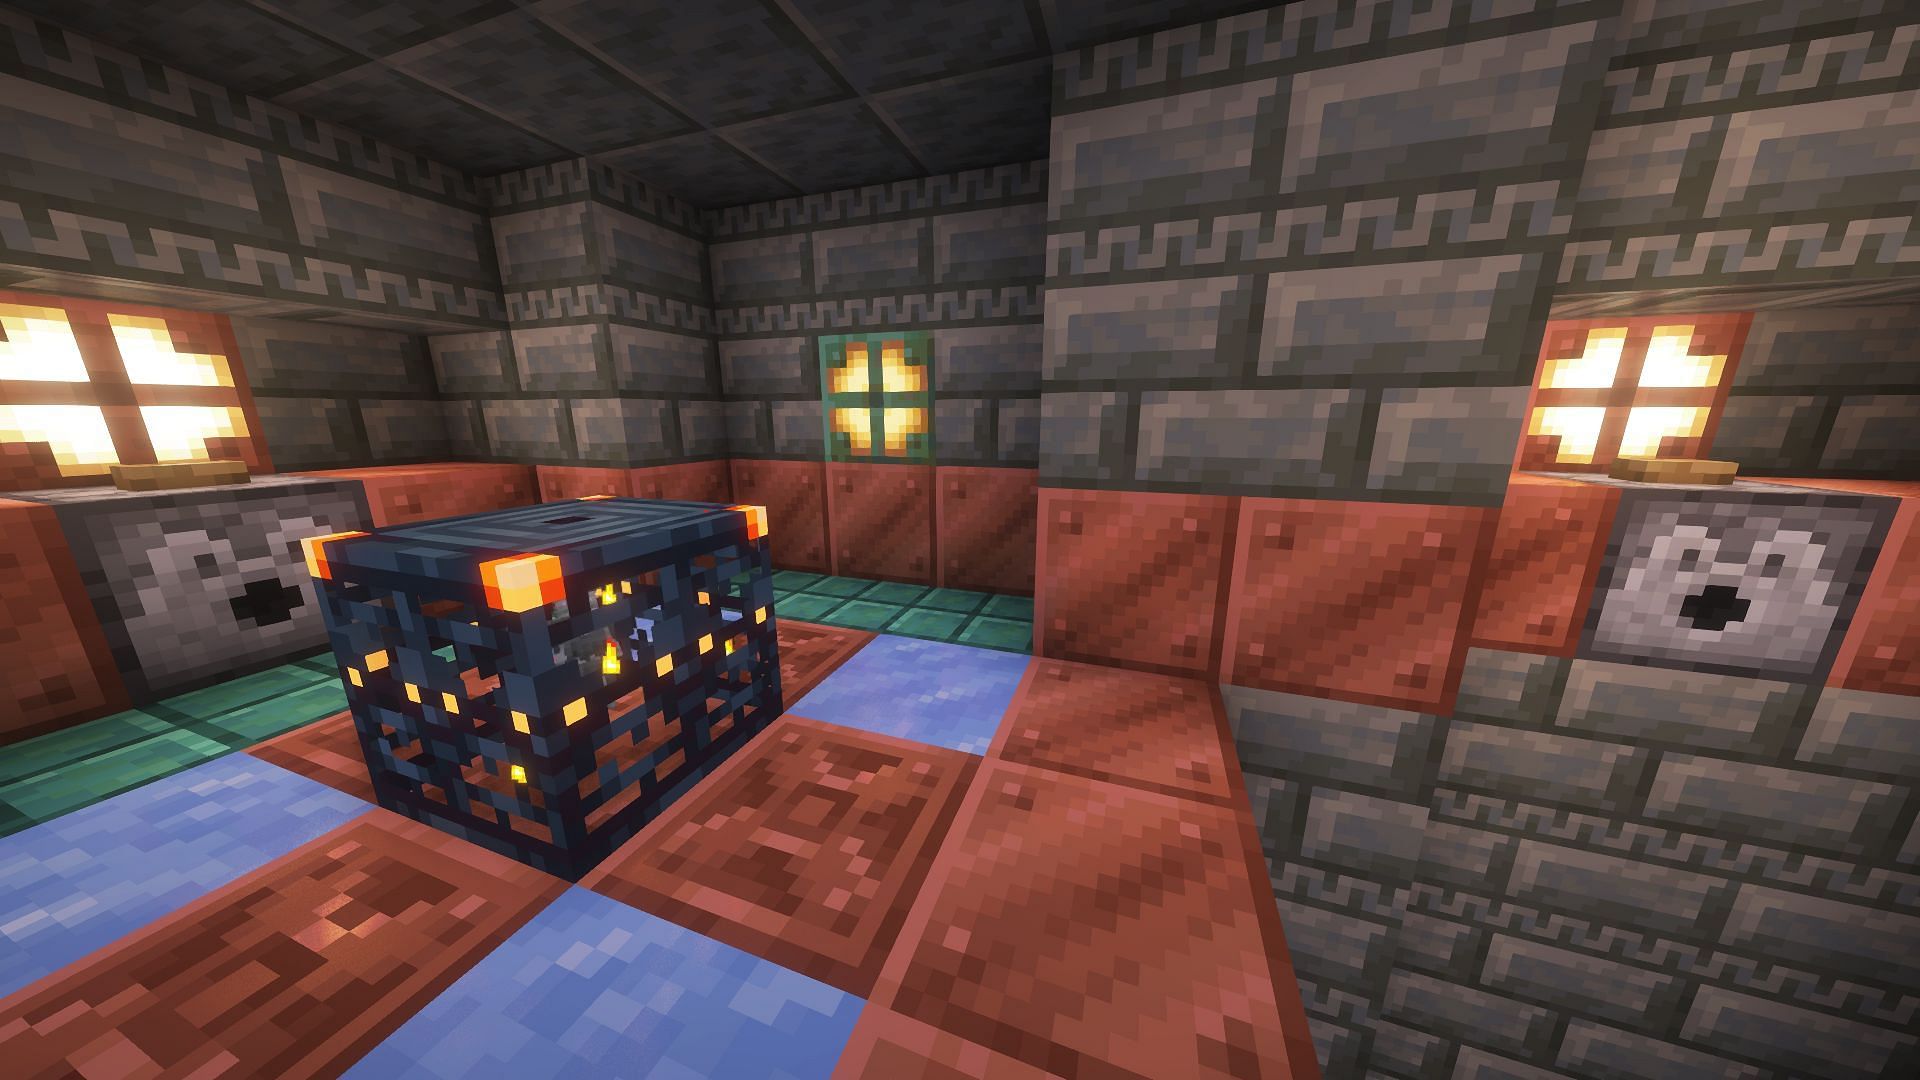 Trial chambers are quite well-lit, meaning that creepers rarely spawn in them (Image via Mojang Studios)